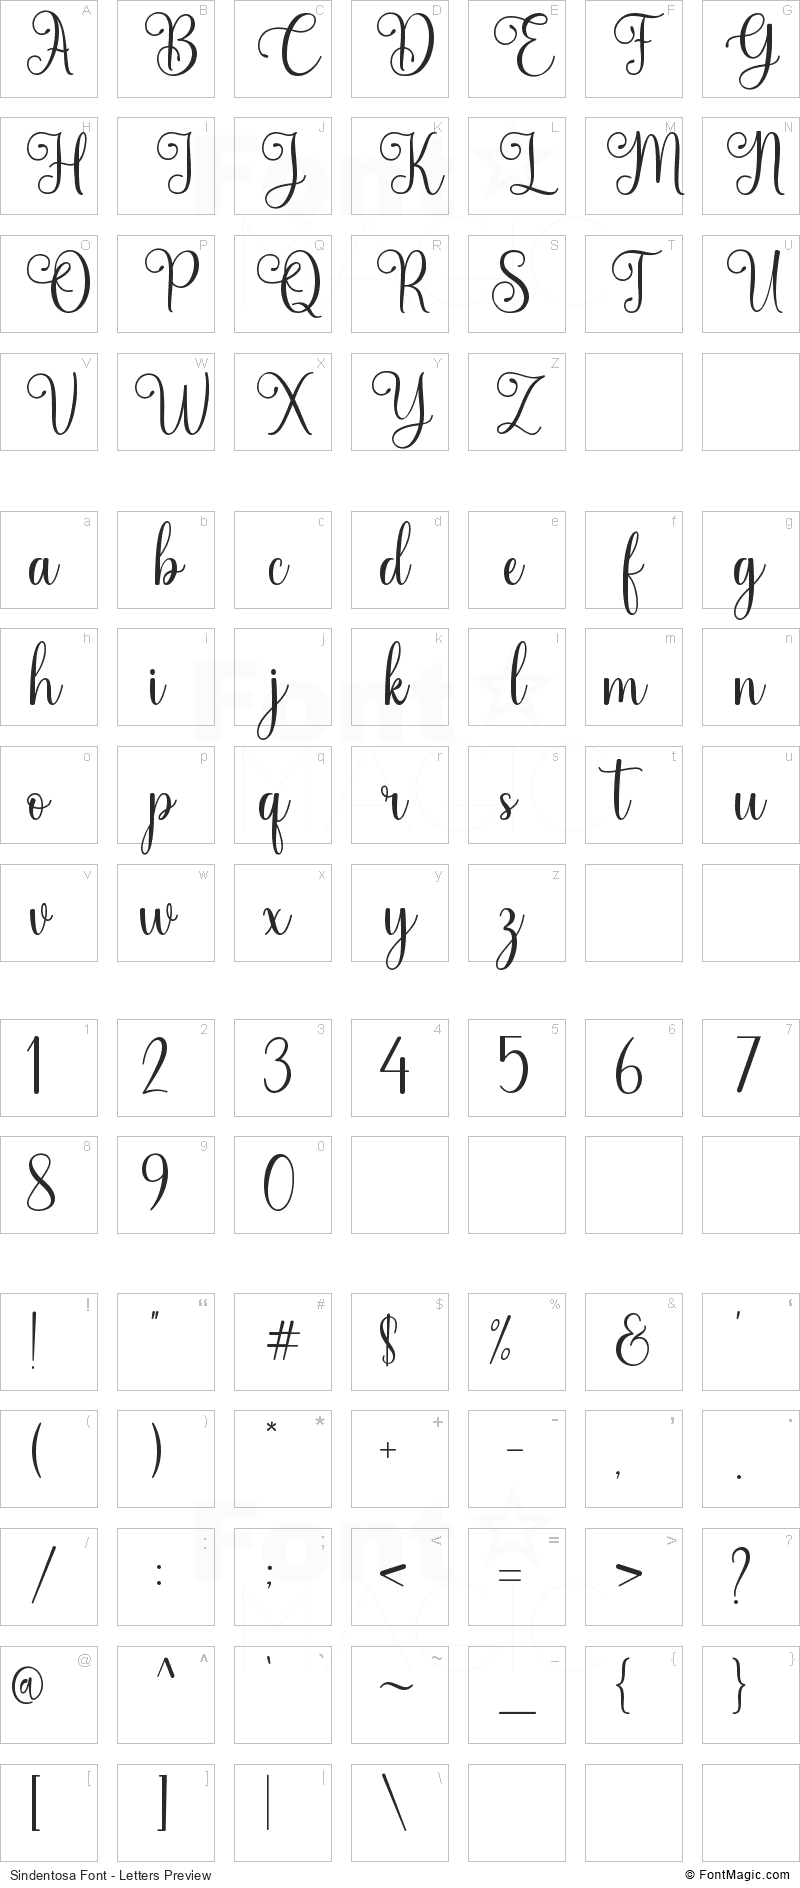 Sindentosa Font - All Latters Preview Chart